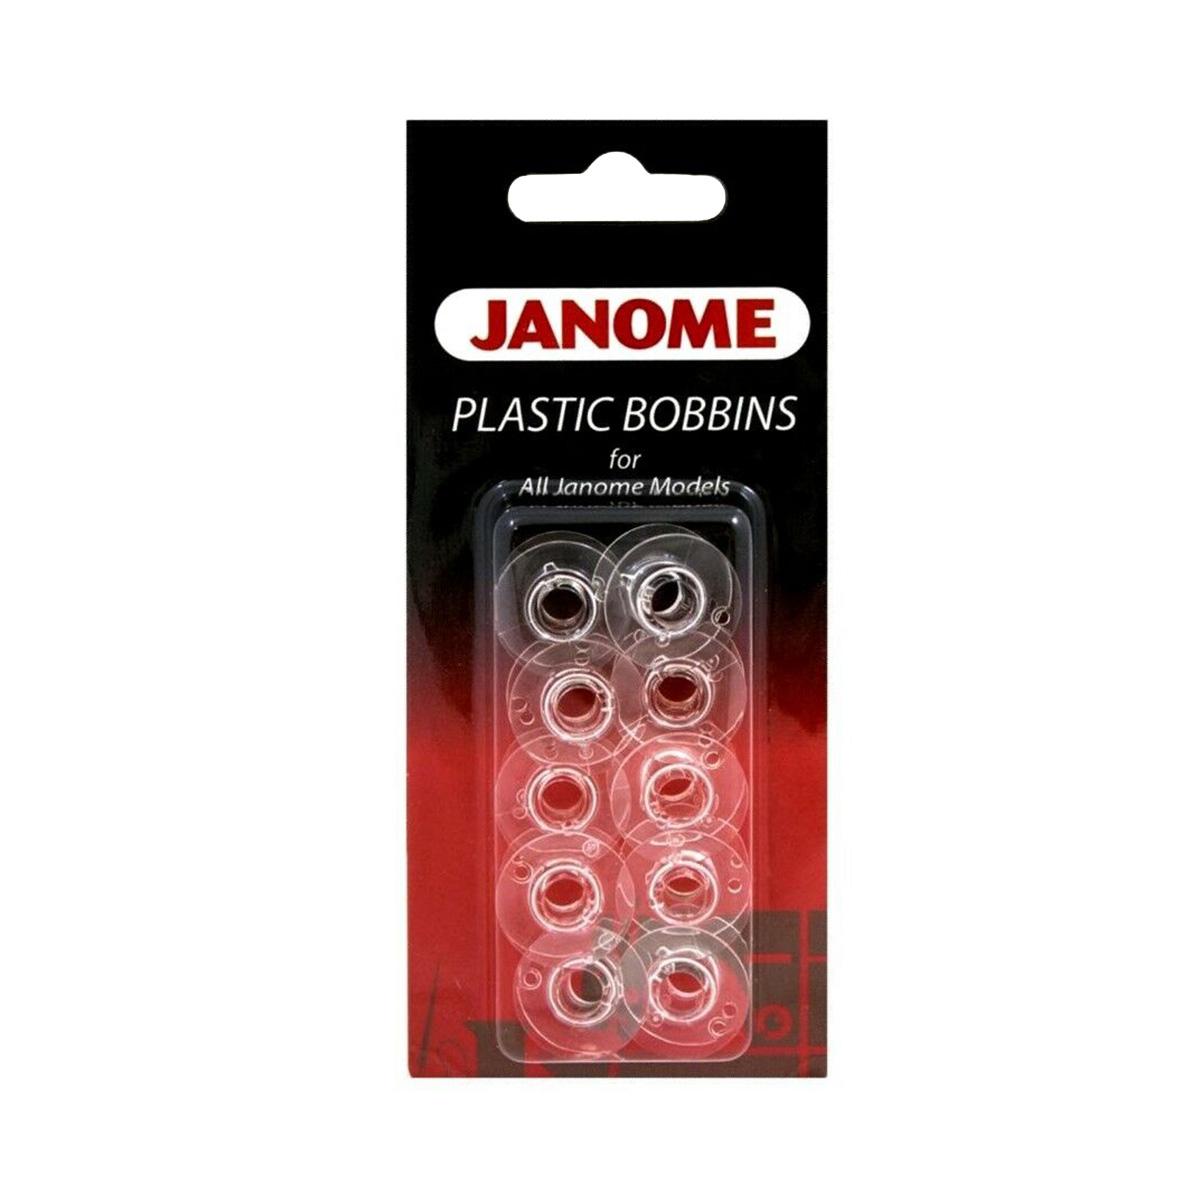 GENUINE JANOME PLASTIC BOBBINS X 10 IN PACKET FOR JANOME SEWING MACHINE 